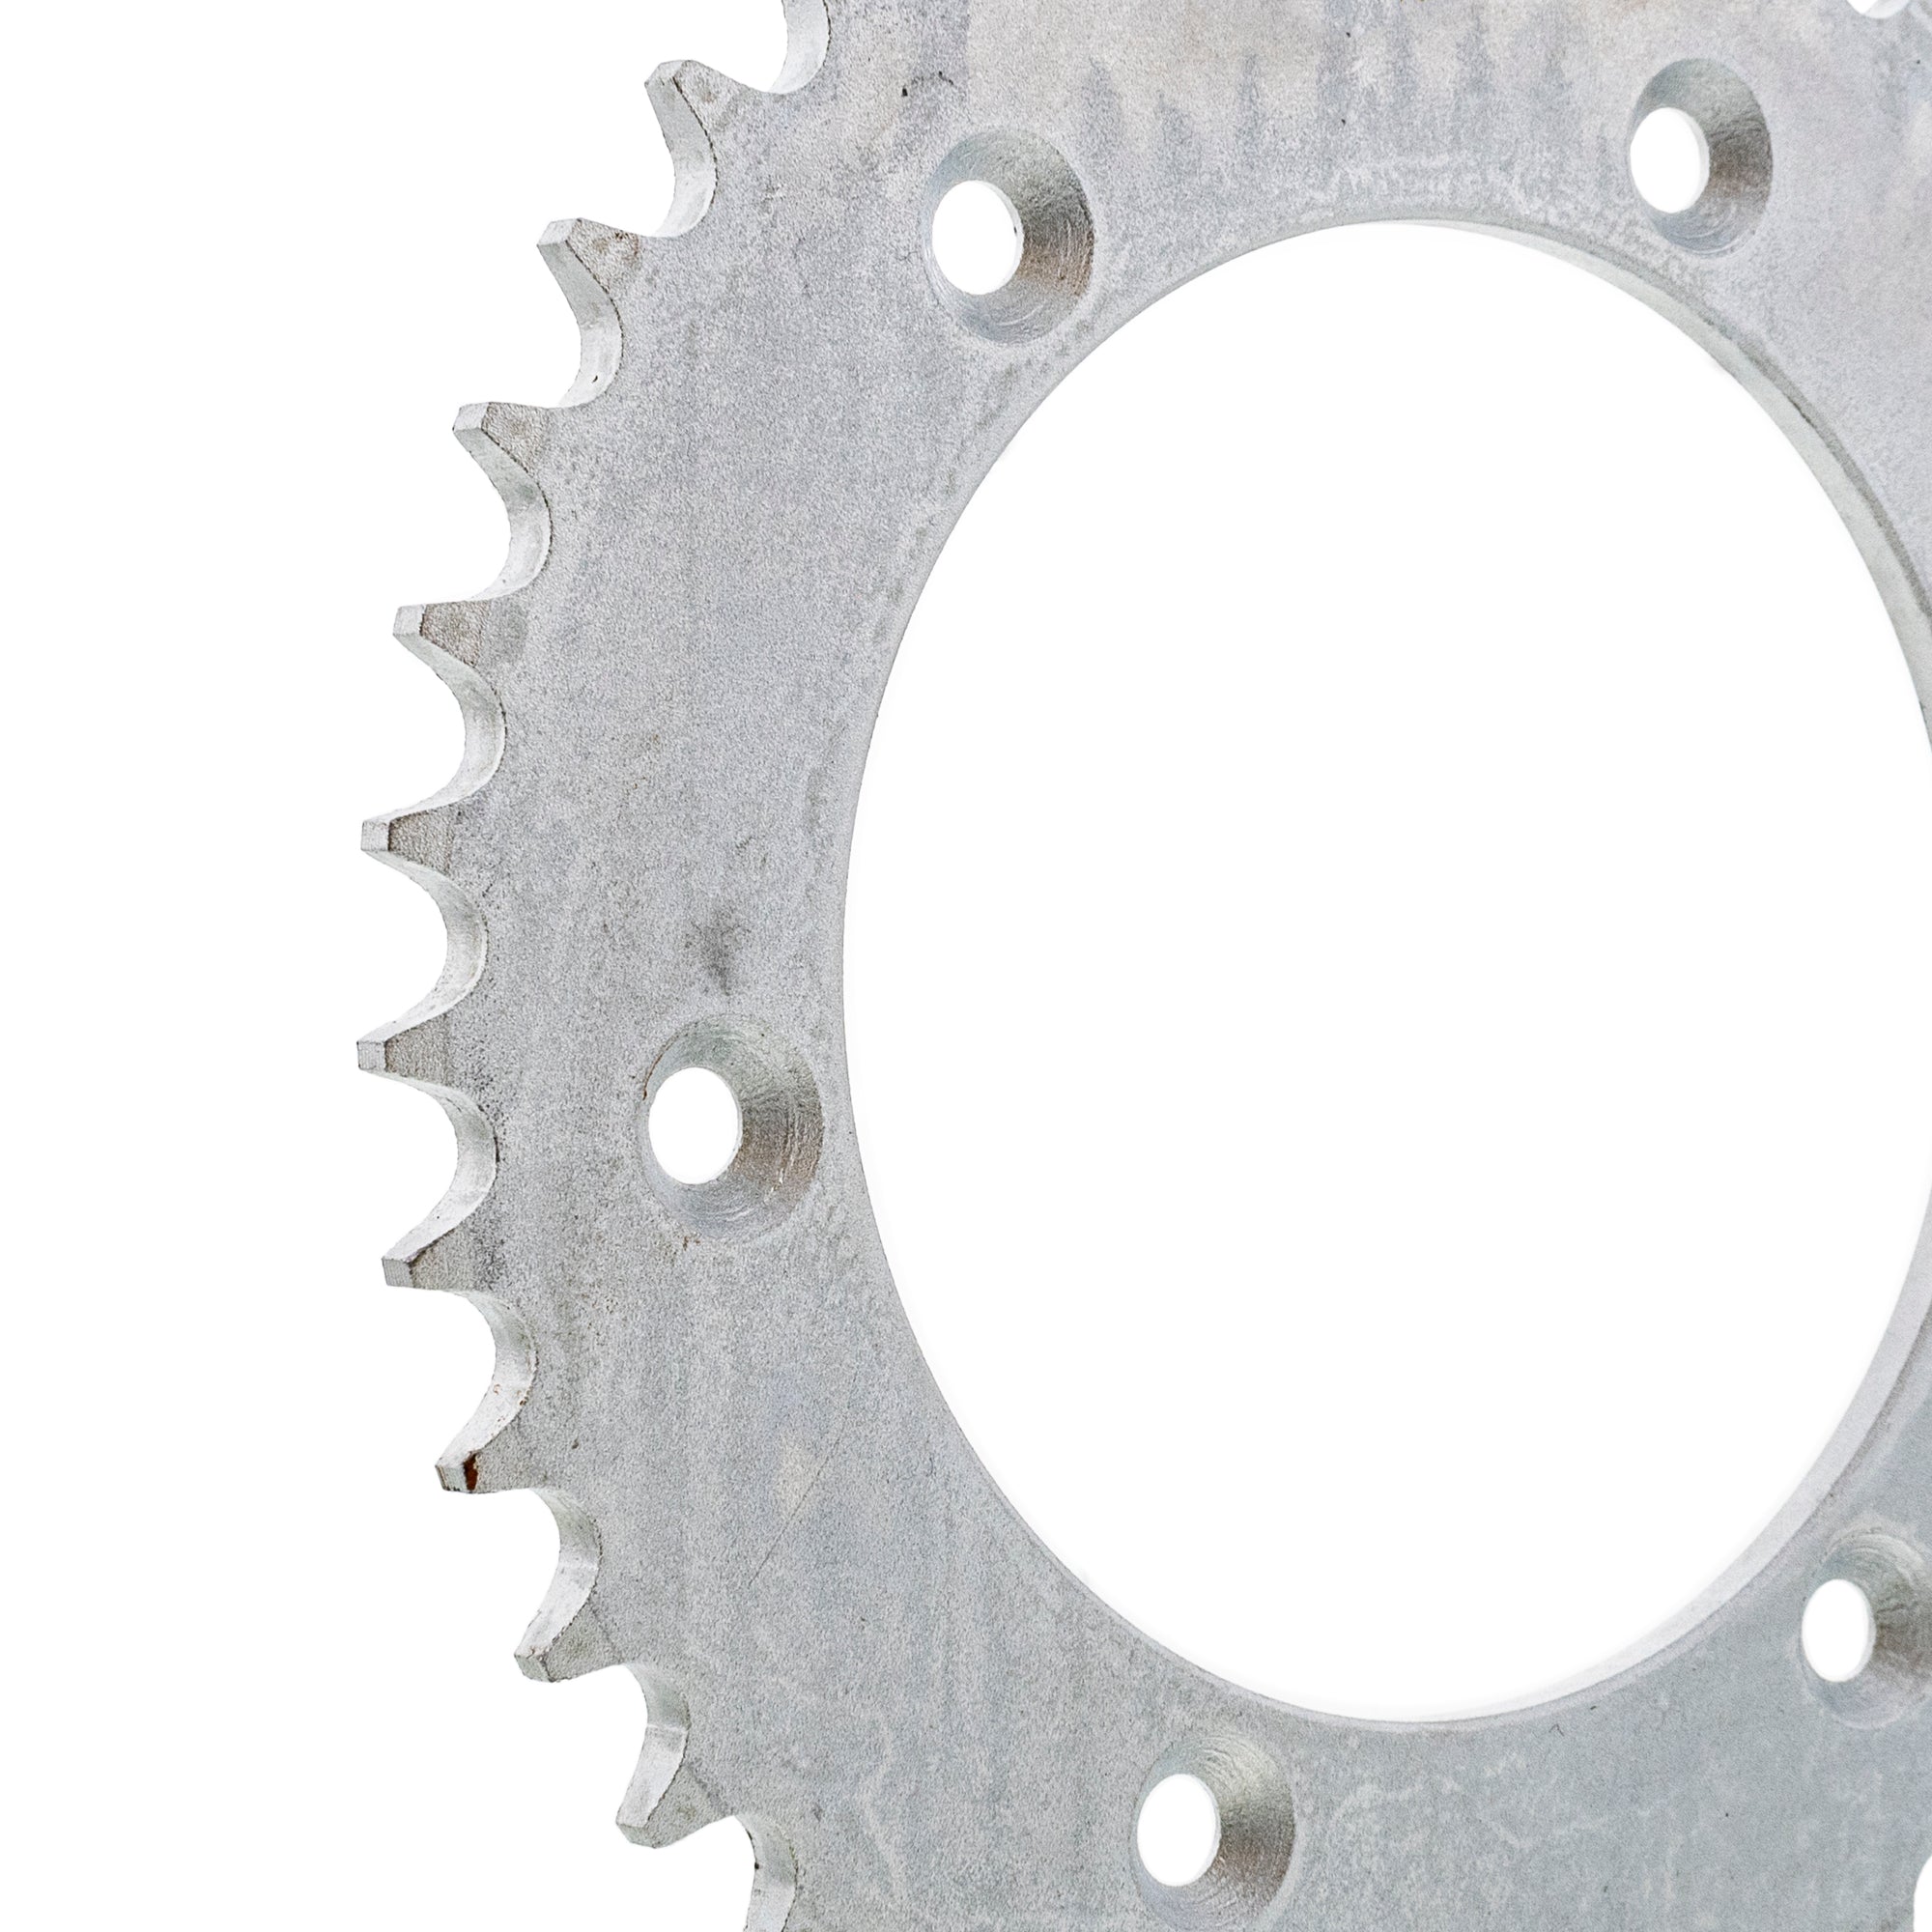 520 Pitch 40 Tooth Rear Drive Sprocket for KTM 250 300 690 520 625